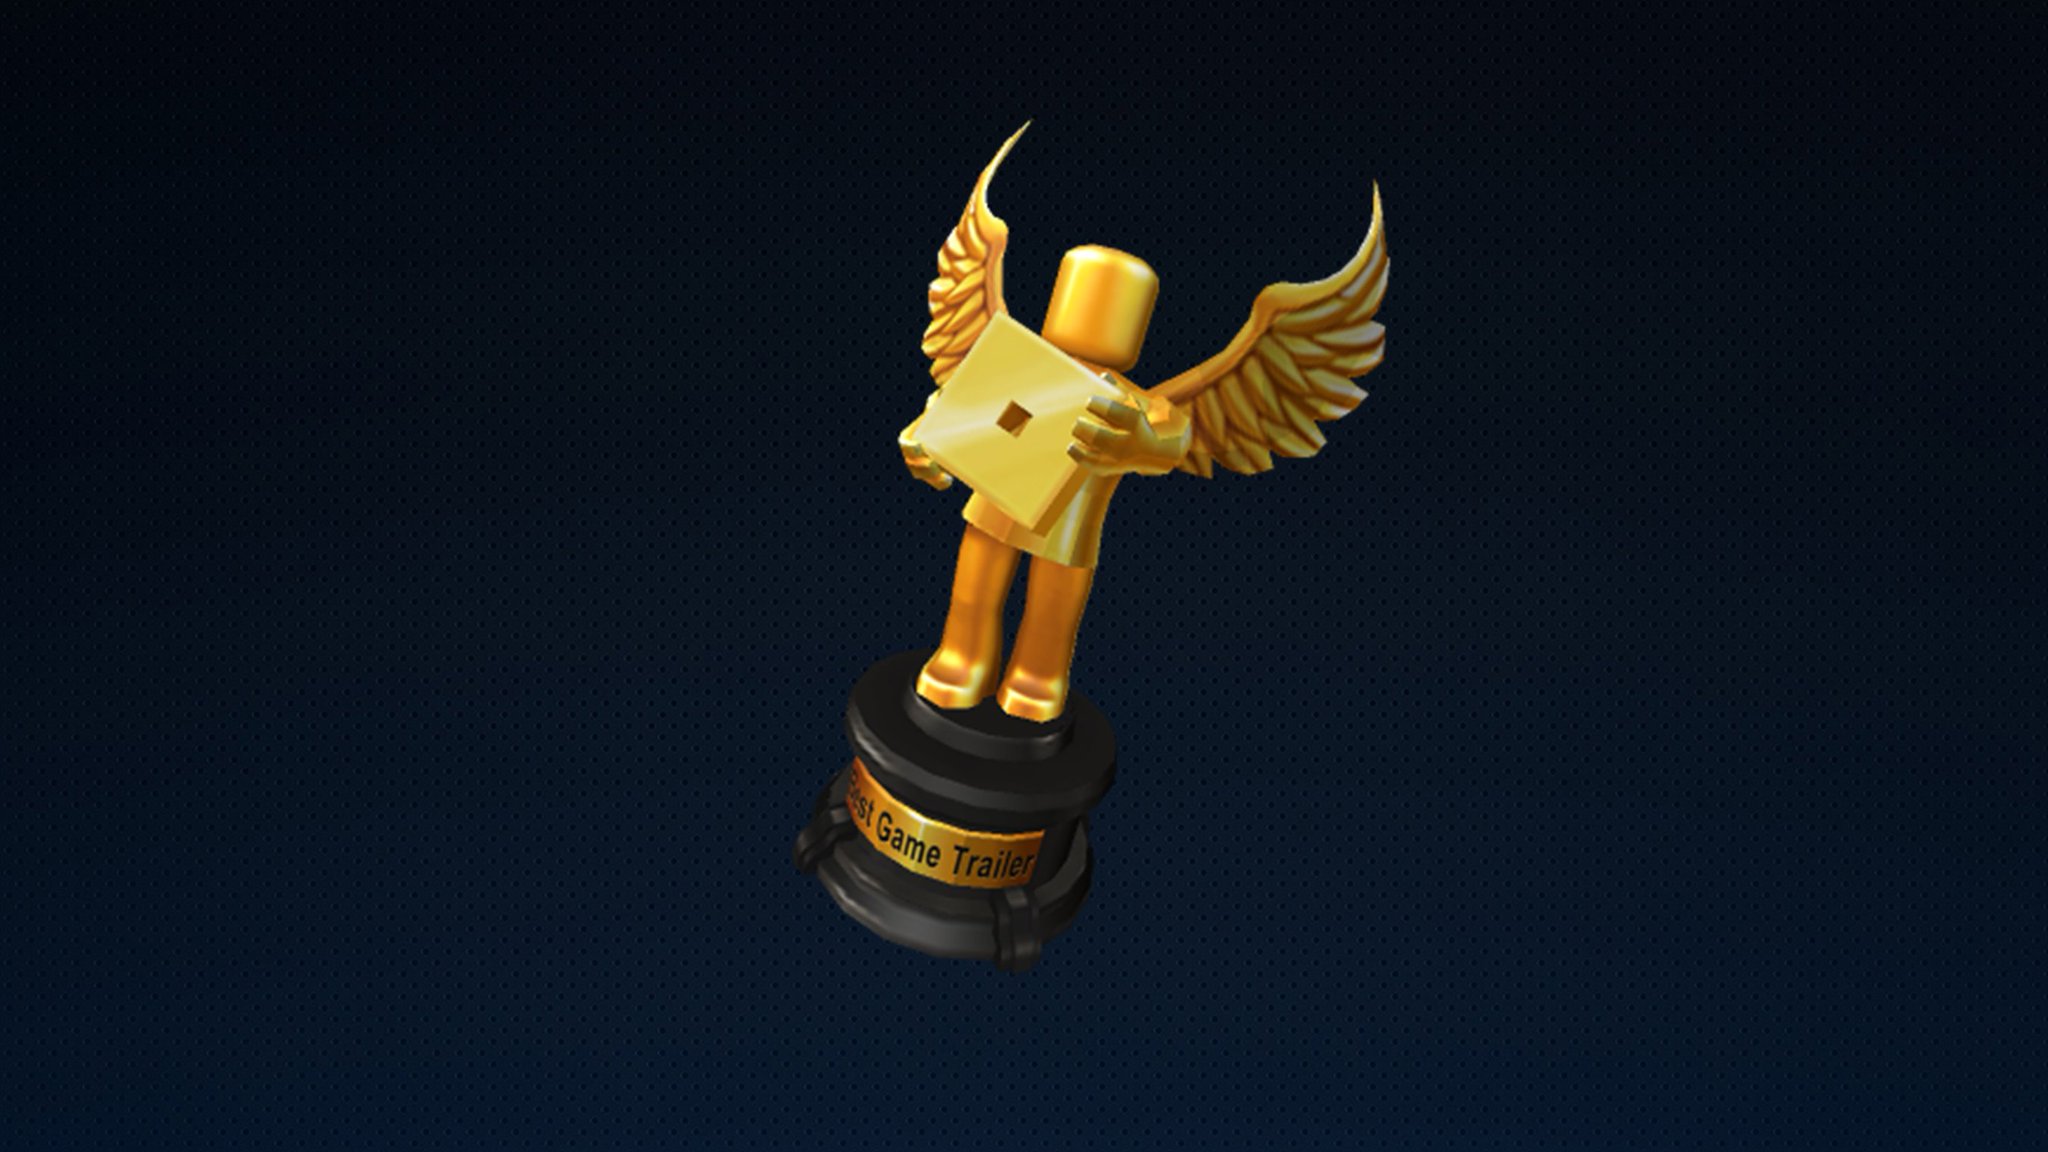 Bloxy News On Twitter The Prestigious Awards Have Finally Arrived Every Winner Of The 8th Annual Roblox Bloxyawards Will Receive A Unique Trophy Stating What Award They Won This Year The Awards Are Back Accessories Rather Than Gears Https T Co - who won the bloxy award for best outfit in roblox